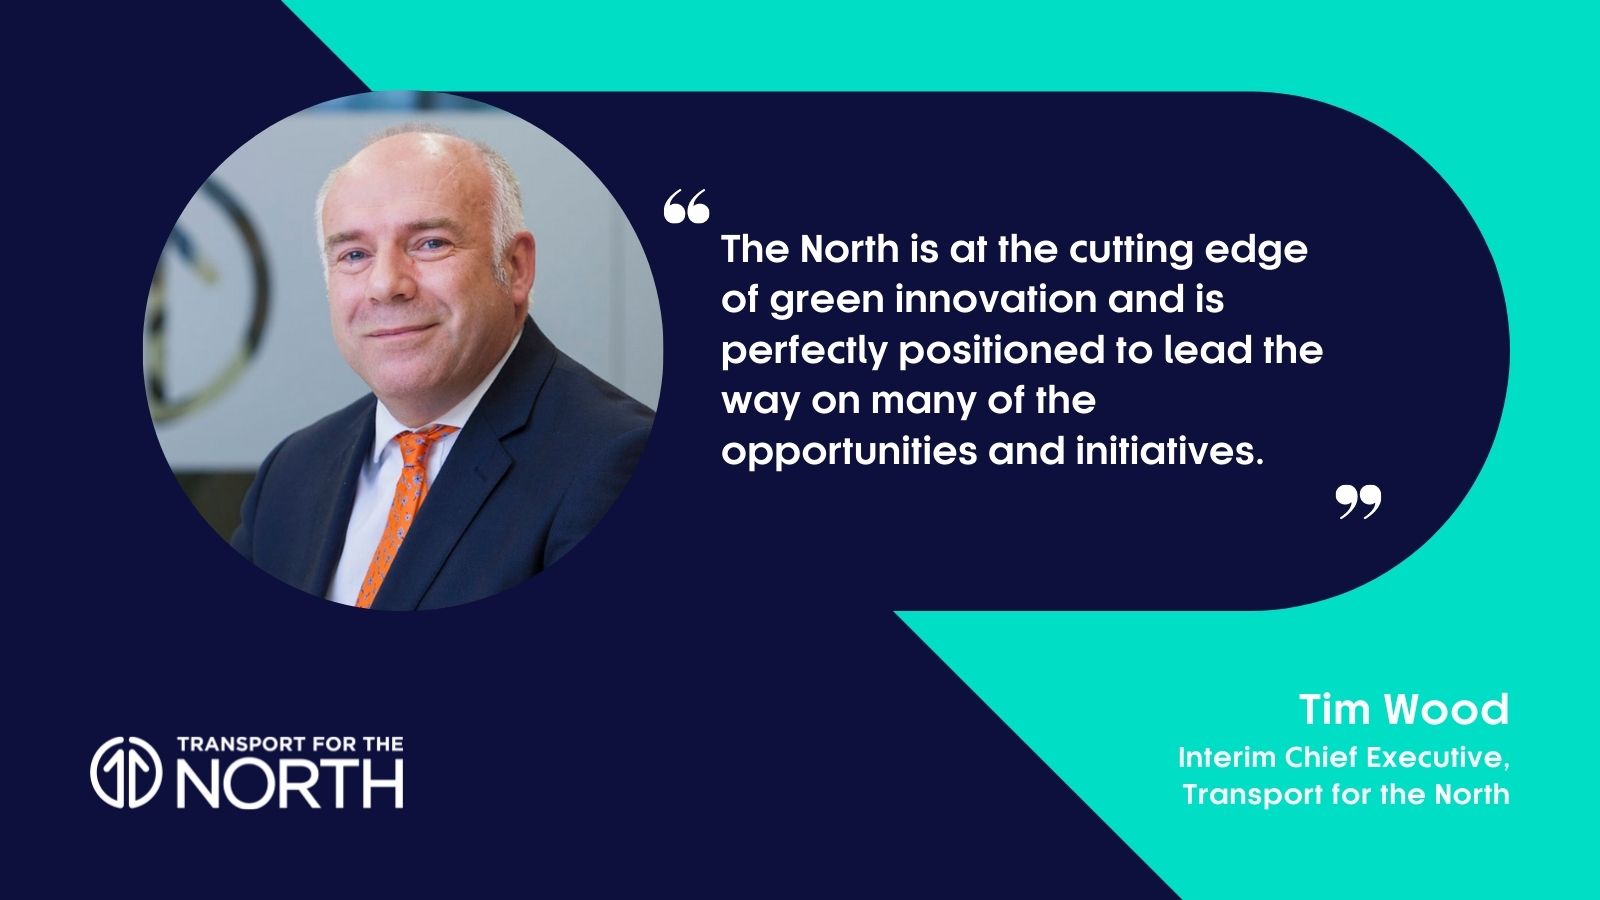 Interim Chief Executive Tim Wood says the North is at the cutting edge of green innovation